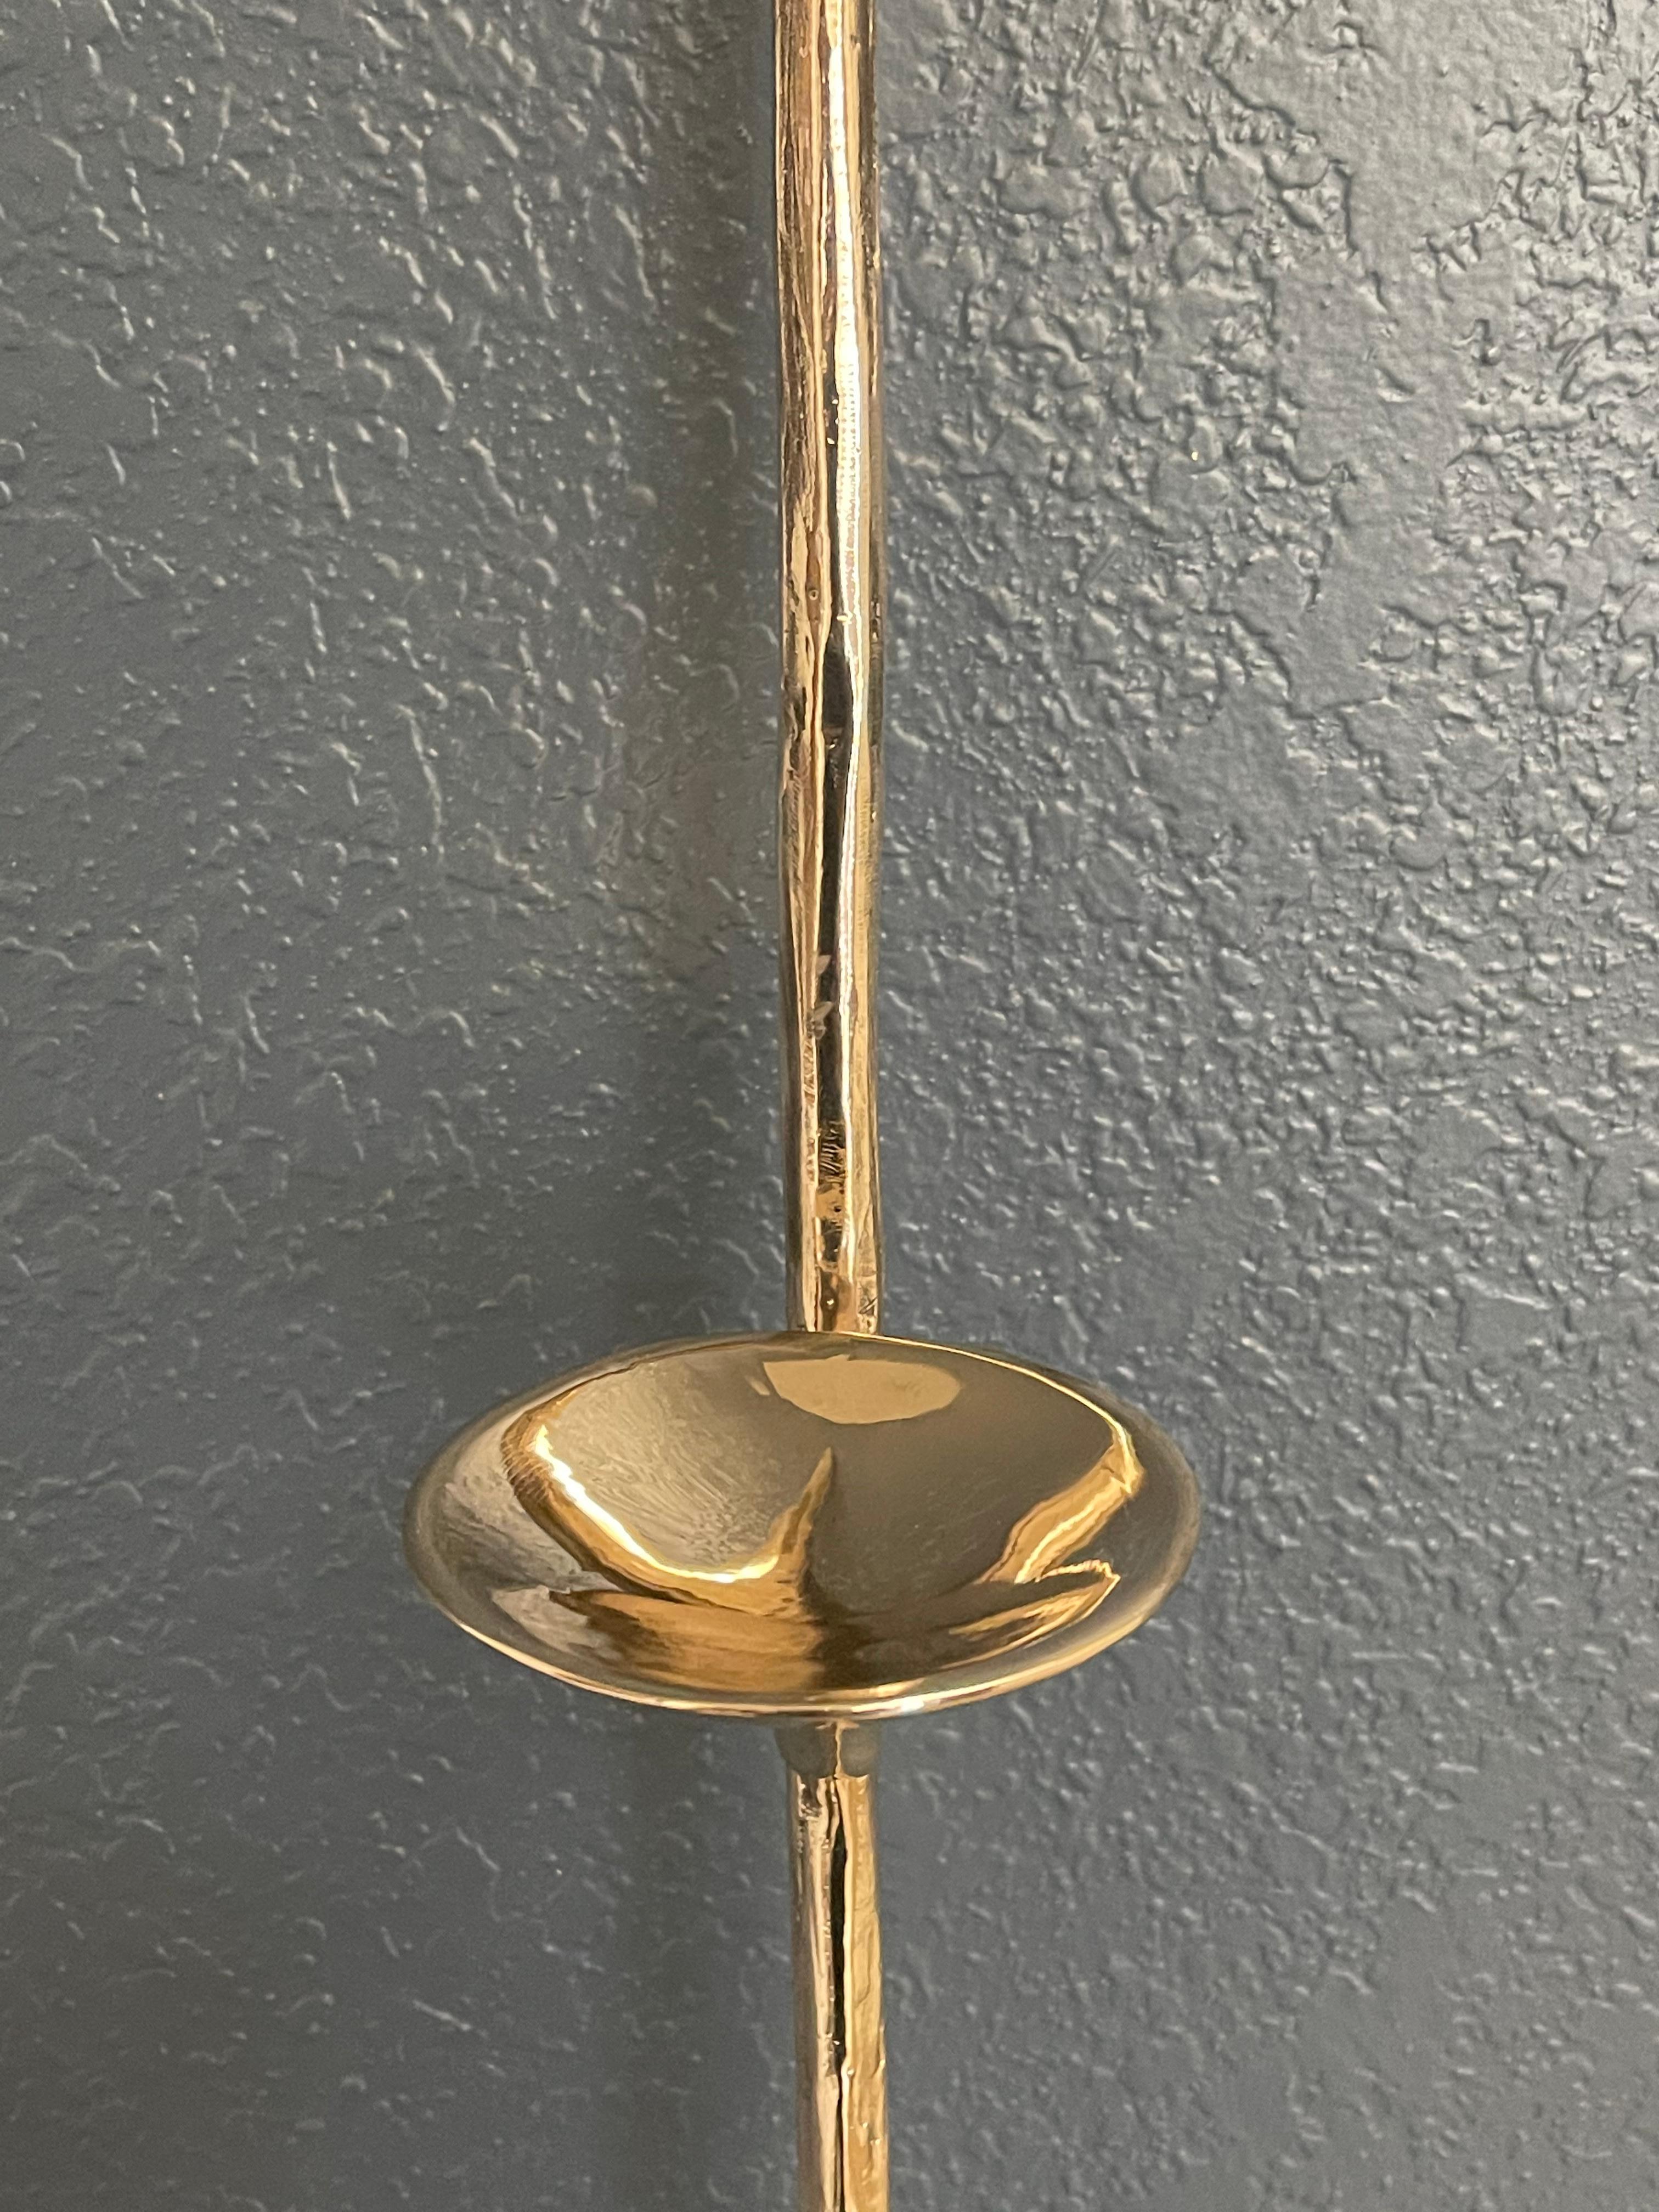 American Polished Bronze Leaning Candlestick by Mary Brōgger